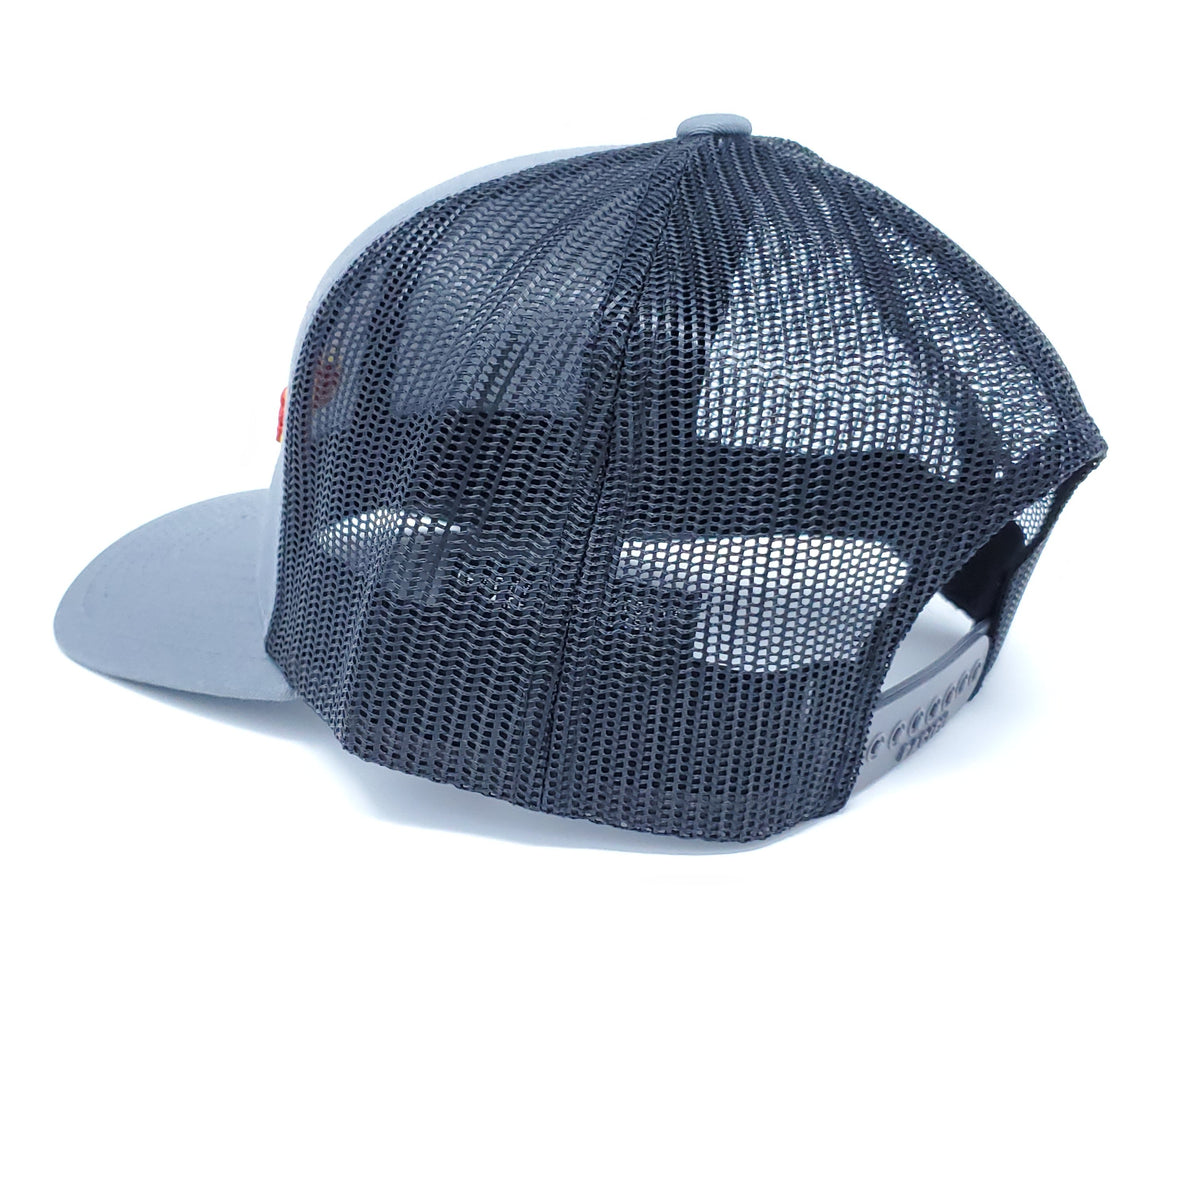 Graphite and Black Embroidered Zia Trucker Style Snapback - Ragged Apparel Screen Printing and Signs - www.nmshirts.com